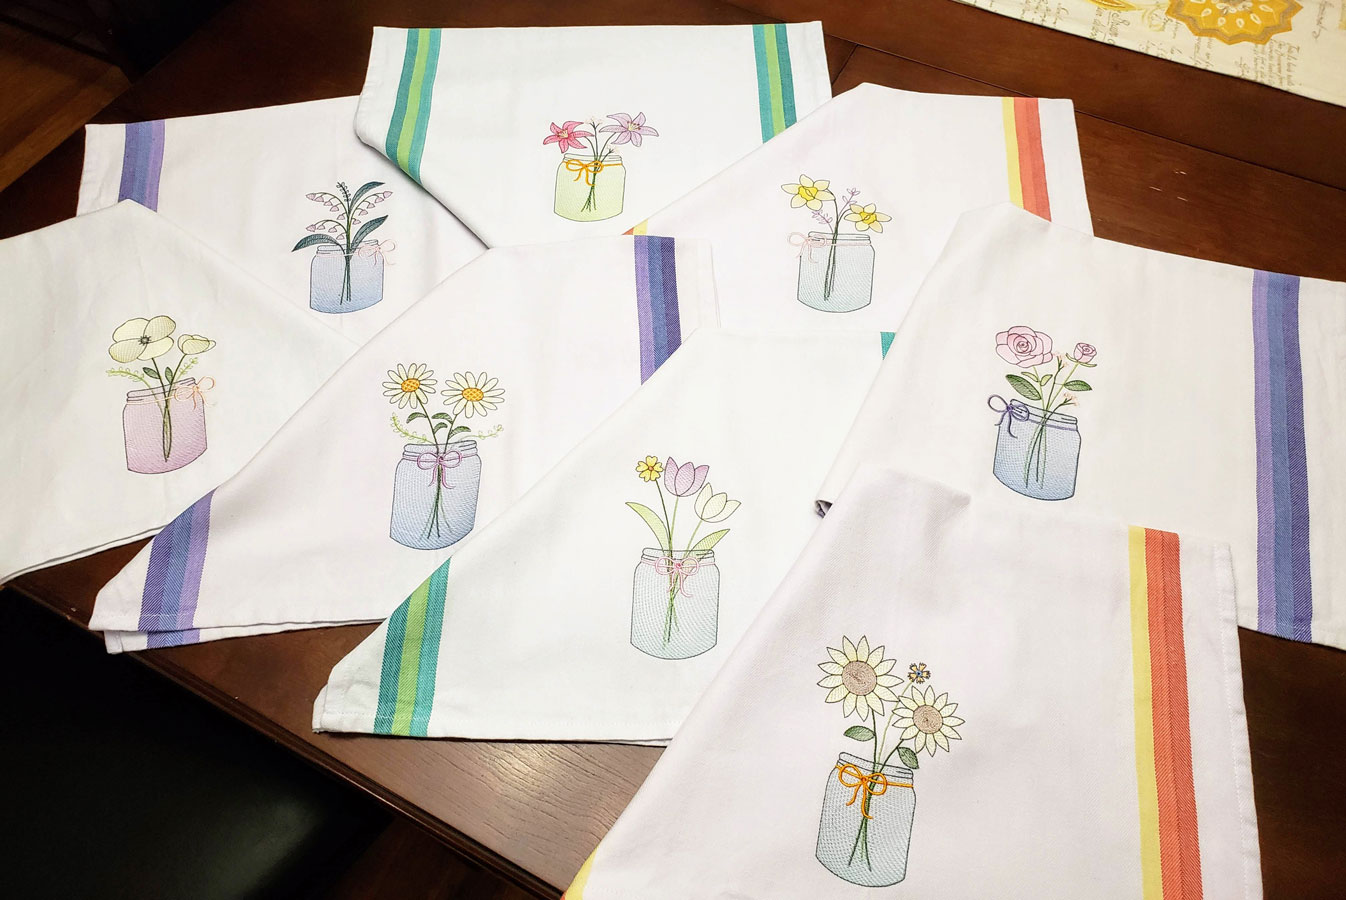 Embroidered Flowers in Mason Jars, Large Kitchen Towels - Dianne Sews & More